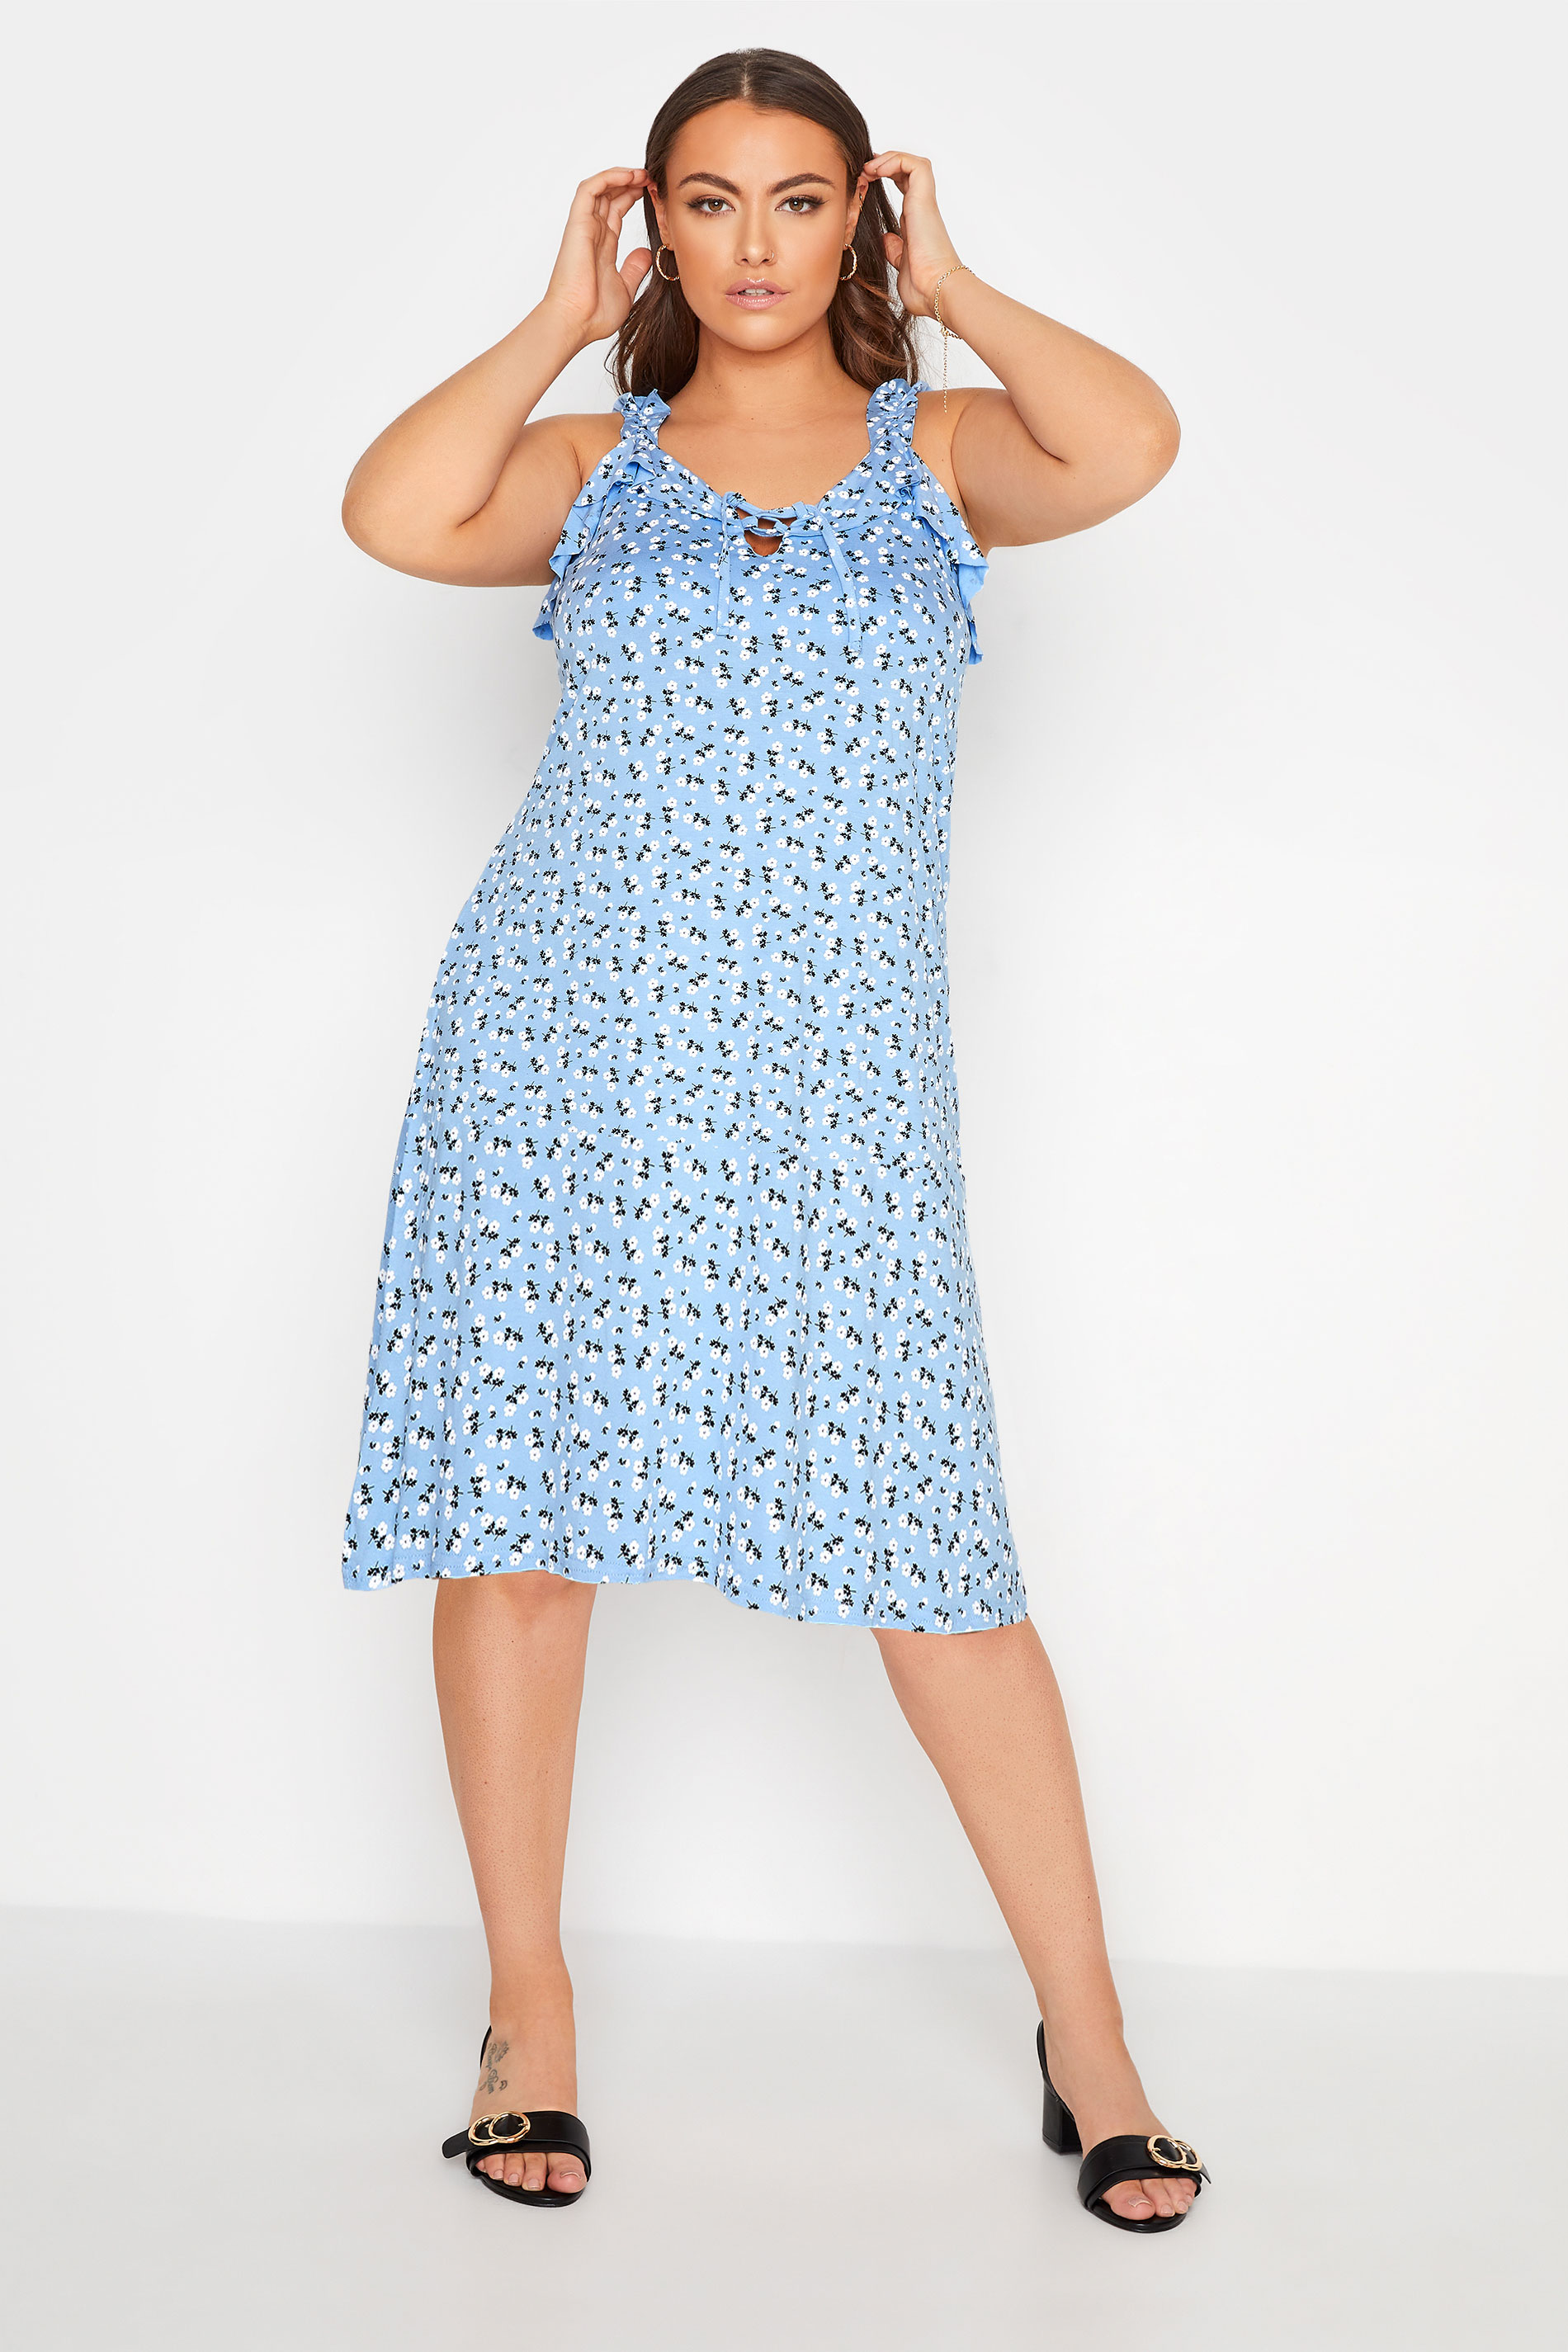 LIMITED COLLECTION Curve Blue Floral Strappy Frill Dress_A.jpg